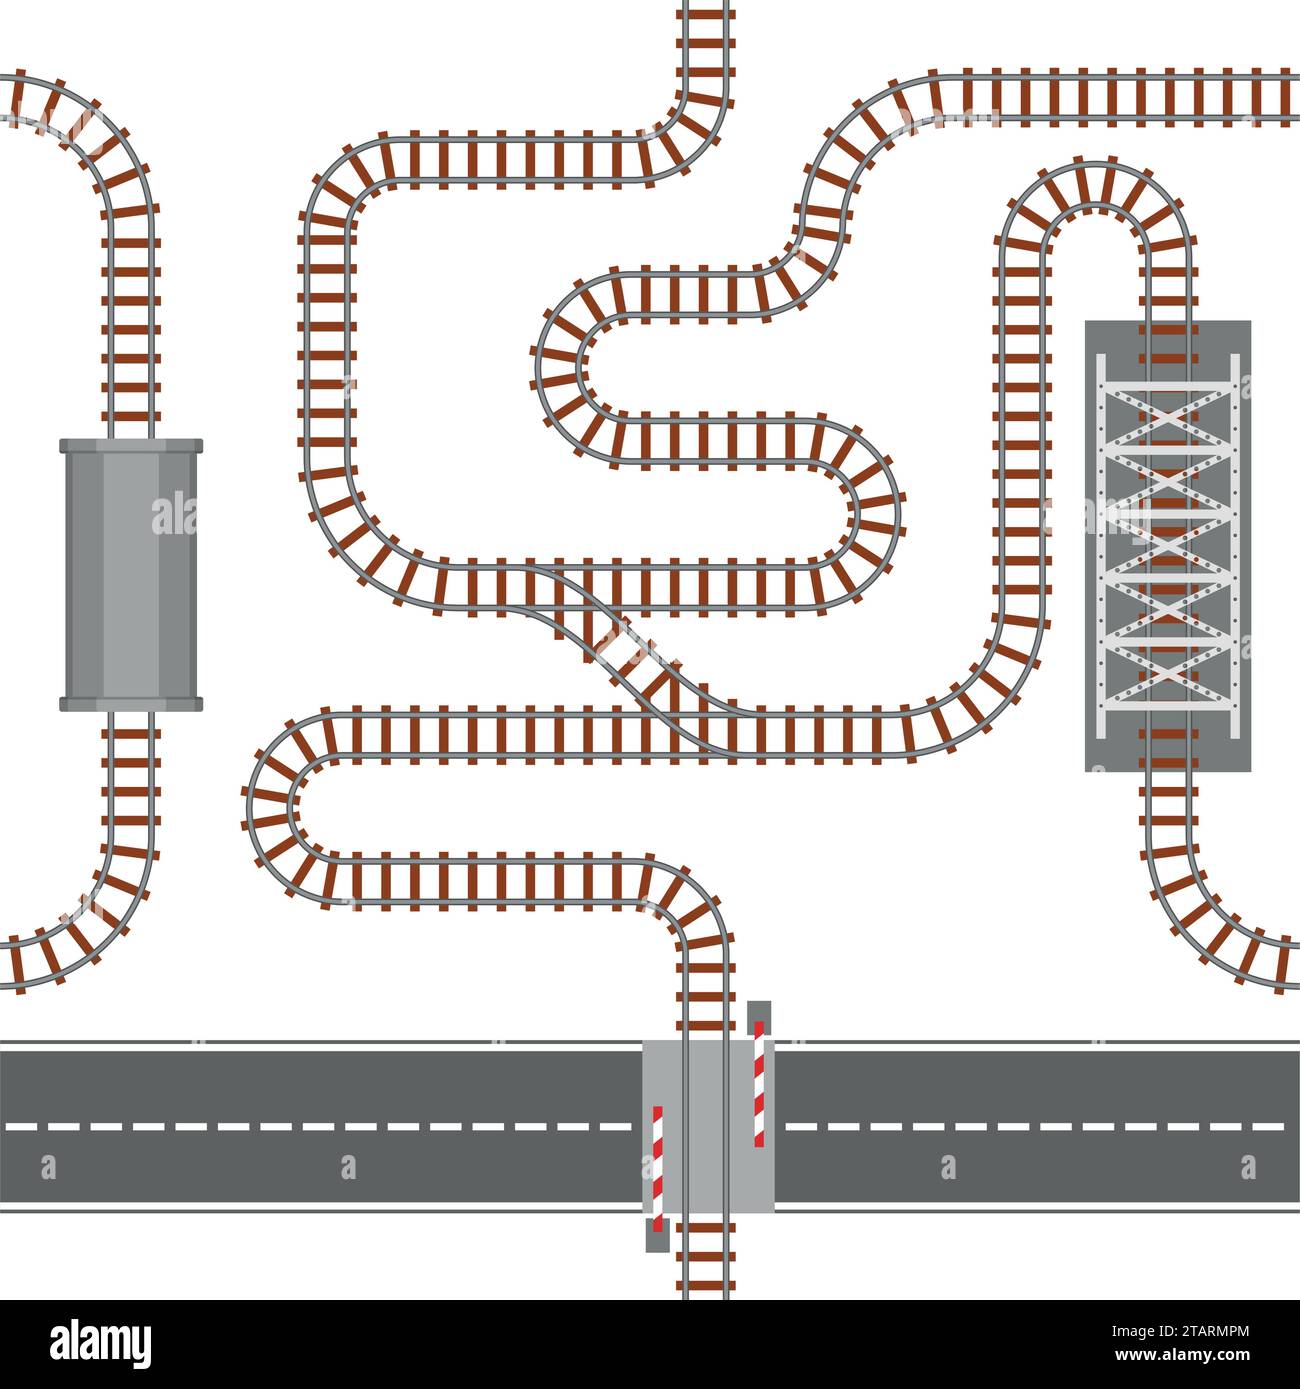 Railway seamless pattern, rail or railroad top view. Train transportation track made of steel and wood, rail wavy or curvy, straight connections. Stock Vector